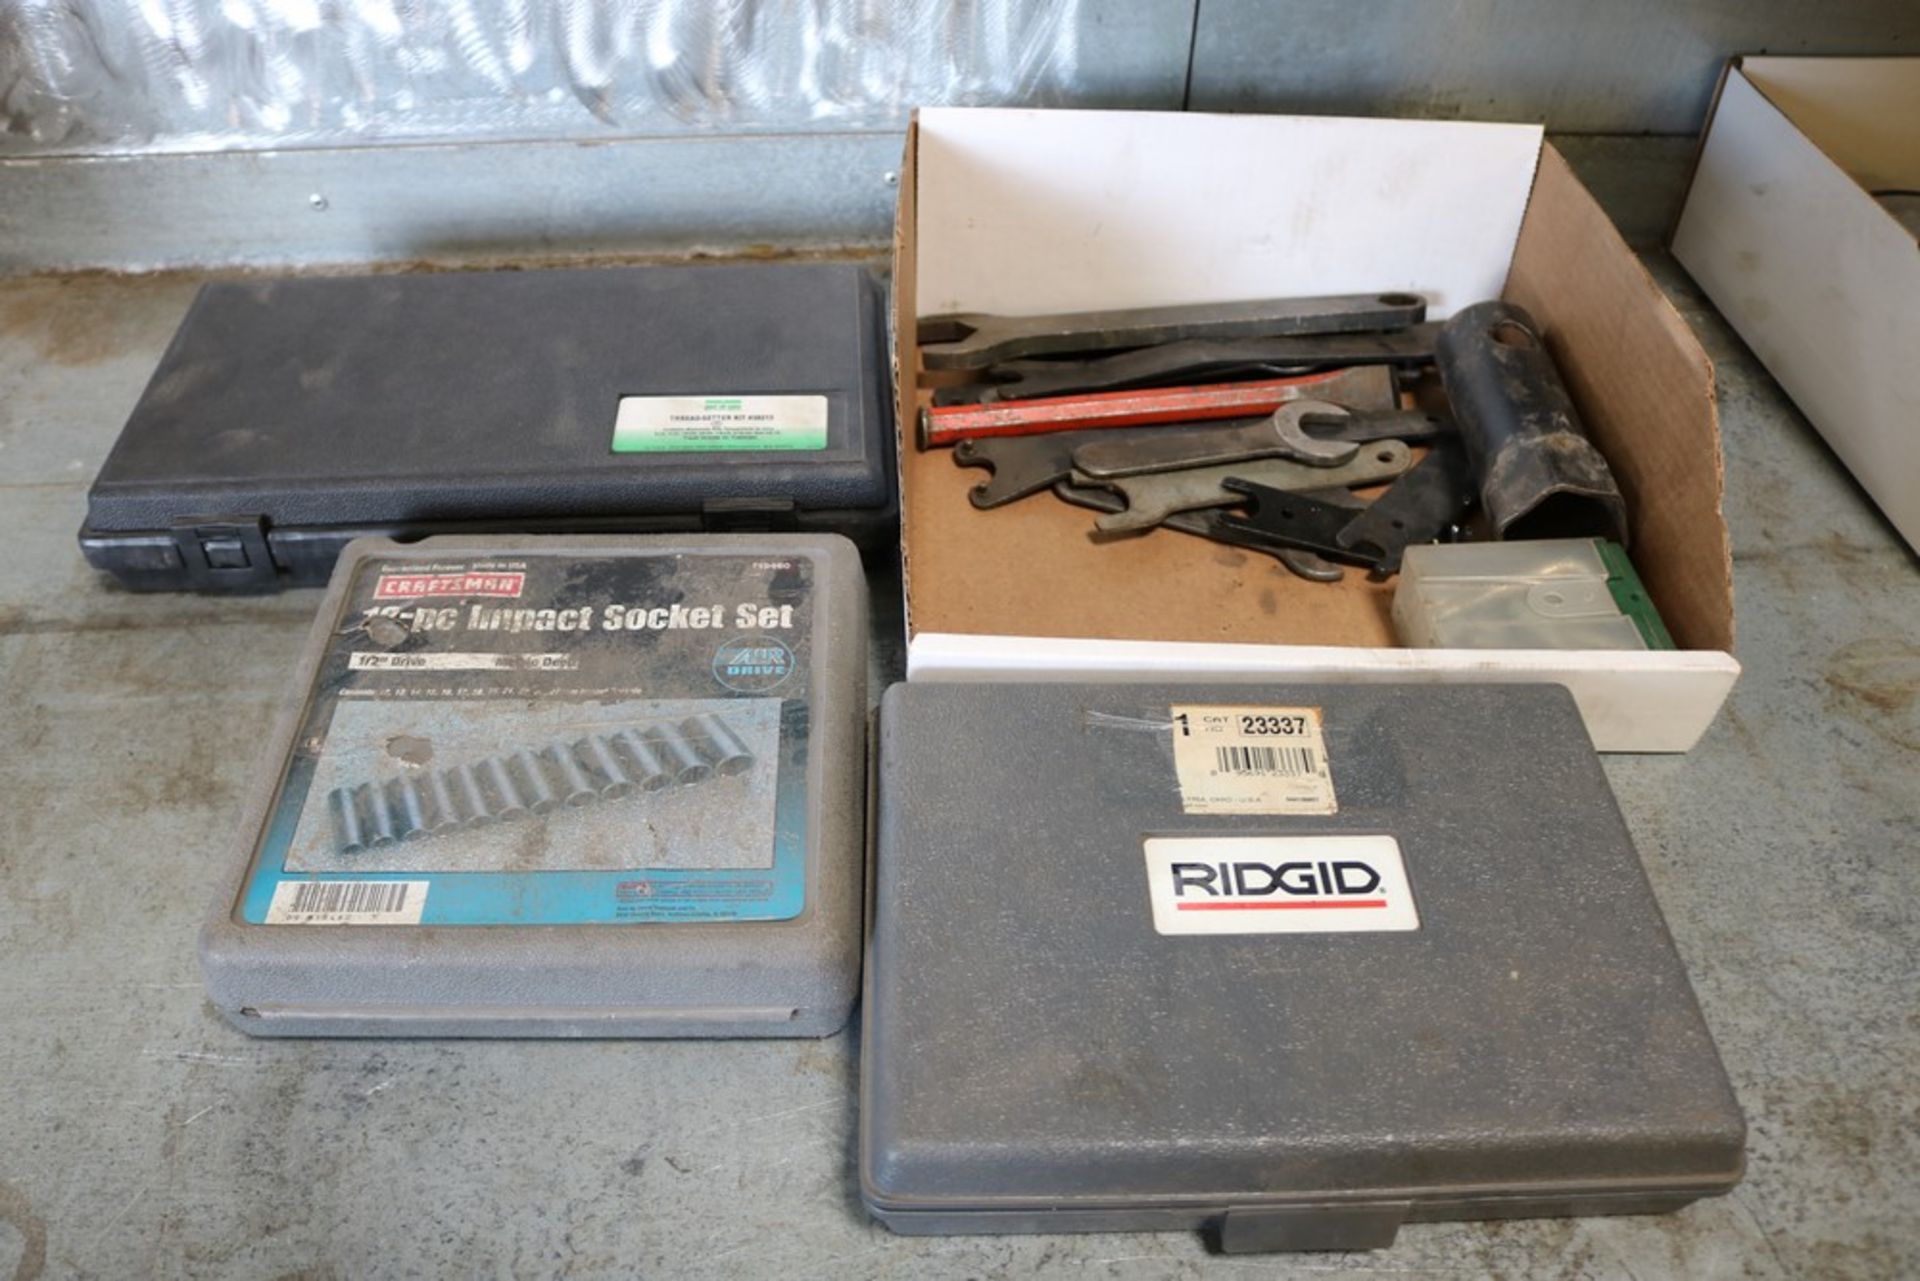 thread setter kit, ridgid 345 flaring tool, impact sockets and wrenches